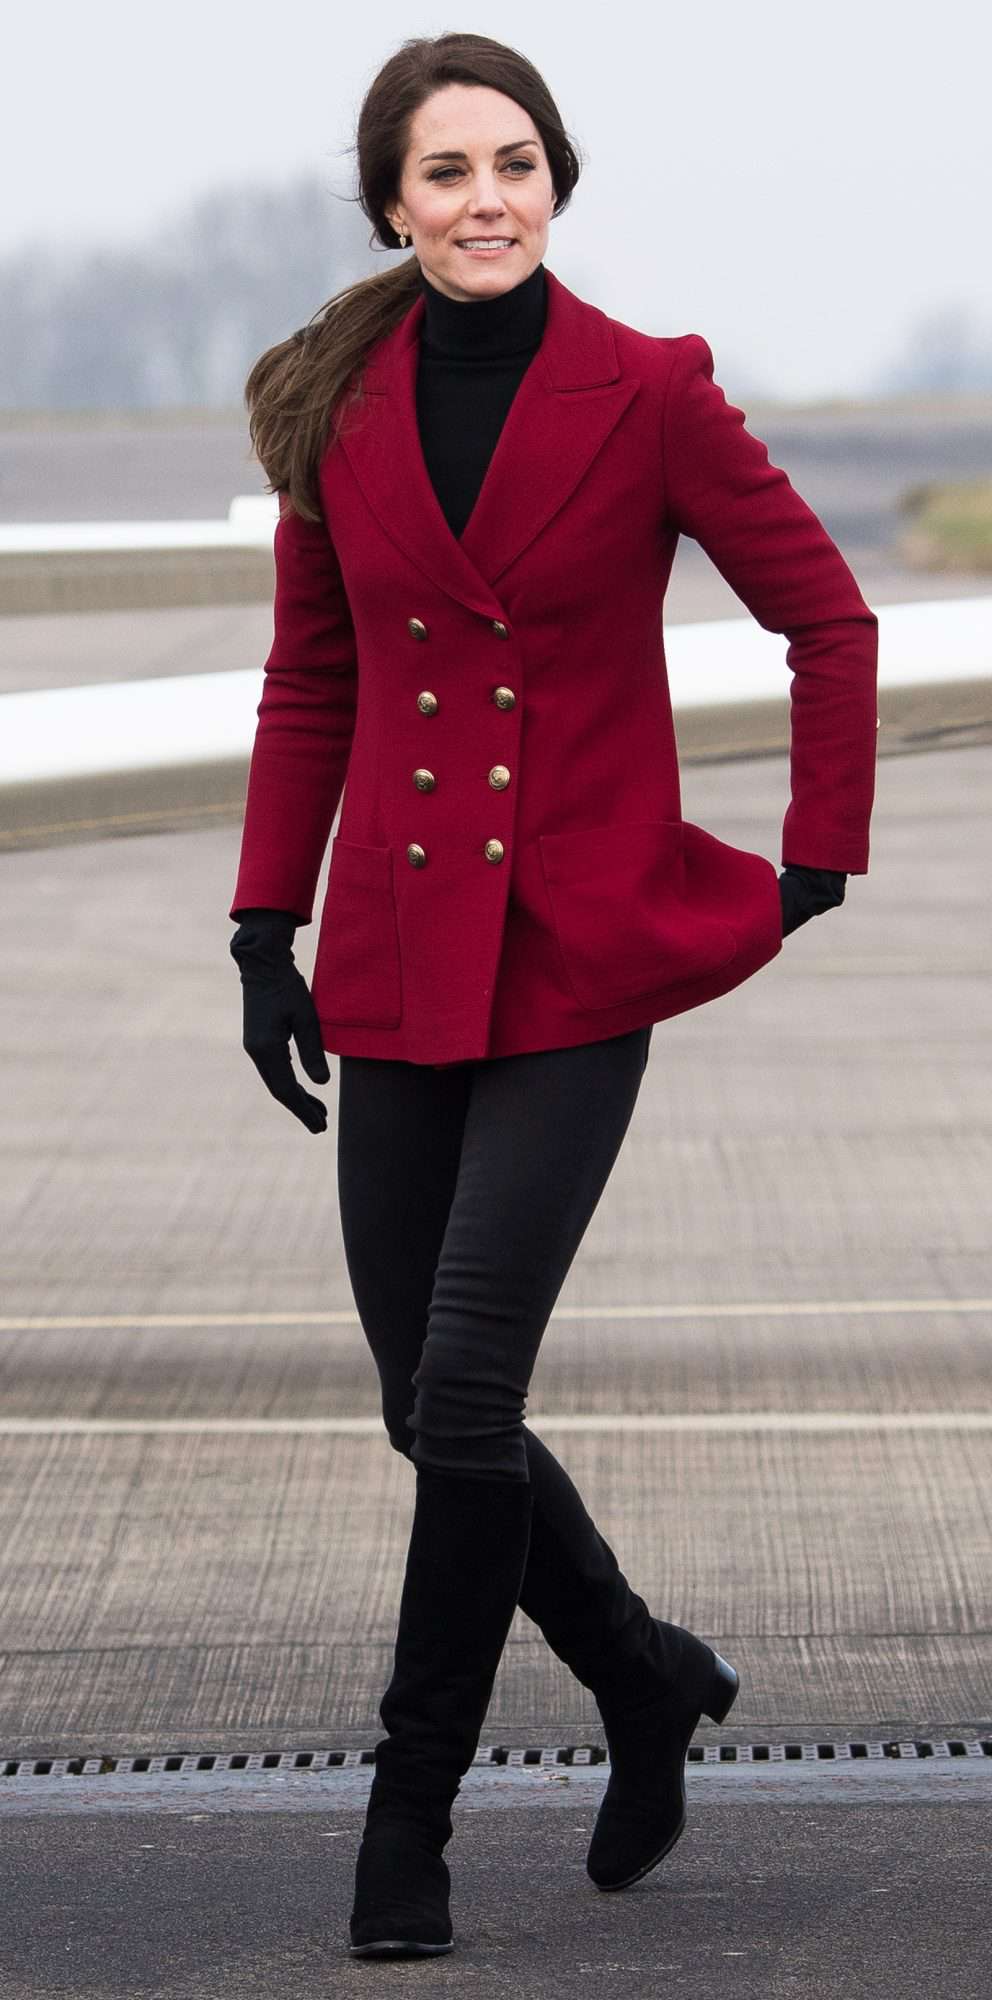 Kate Middleton in a double-breasted red wool blazer, black turtleneck, skinnies, and boots